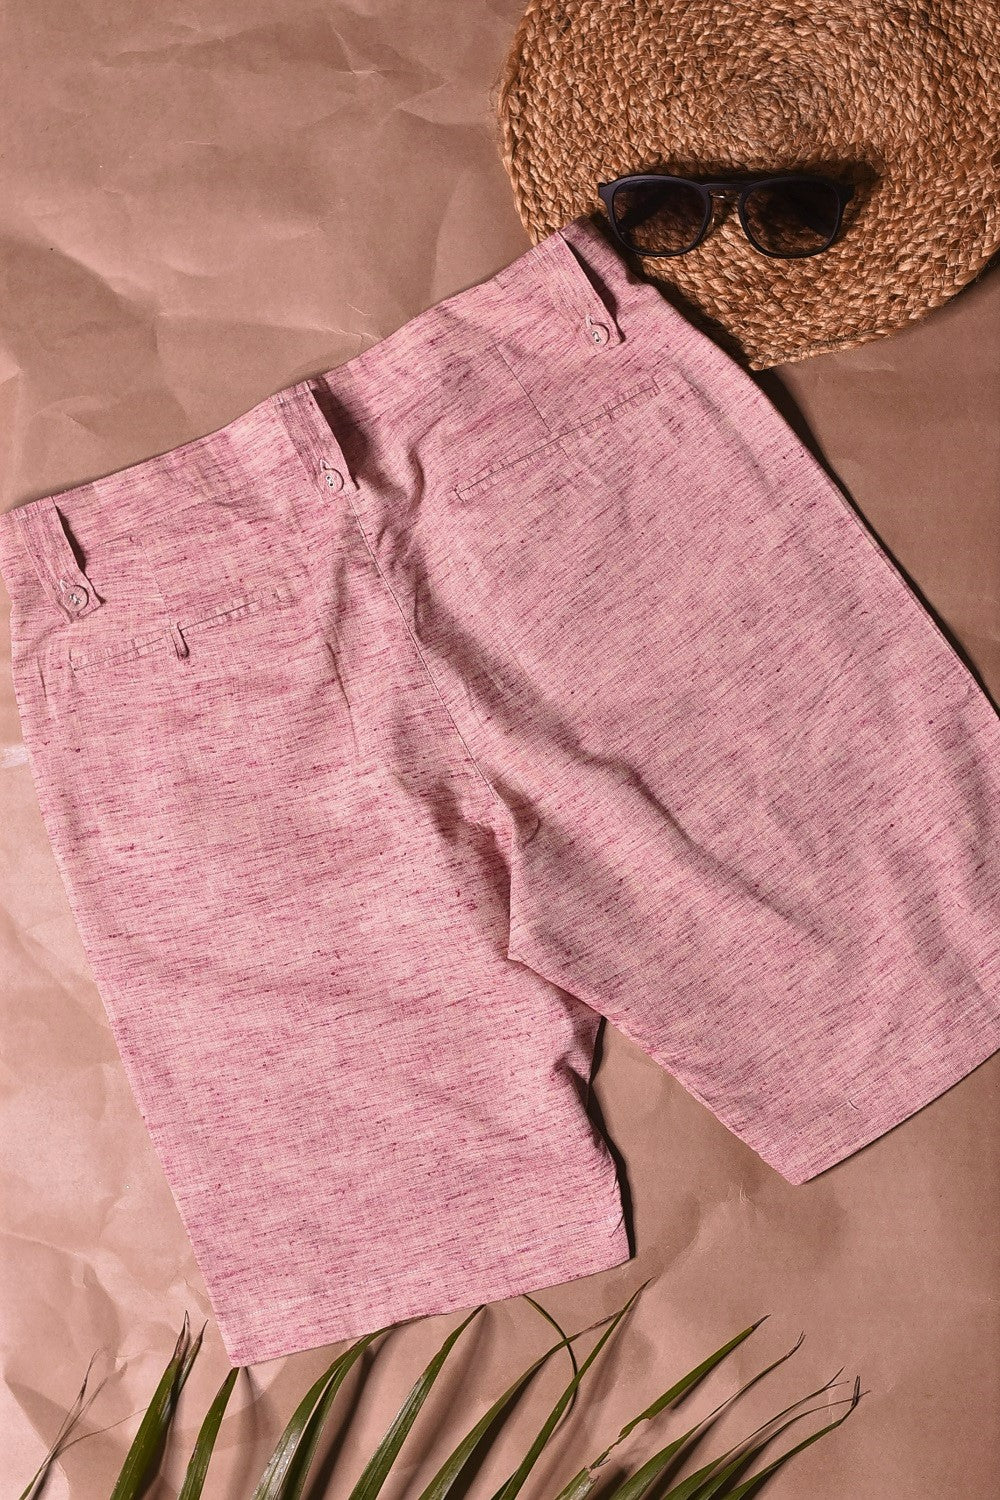 Pink Textured Pocket Shorts at Kamakhyaa by Charkhee. This item is Bottoms, Casual Wear, Cotton, Fitted at Waist, For Siblings, Less than $50, Mens Bottom, Menswear, Natural, Raspberry, Regular Fit, Shorts, Textured